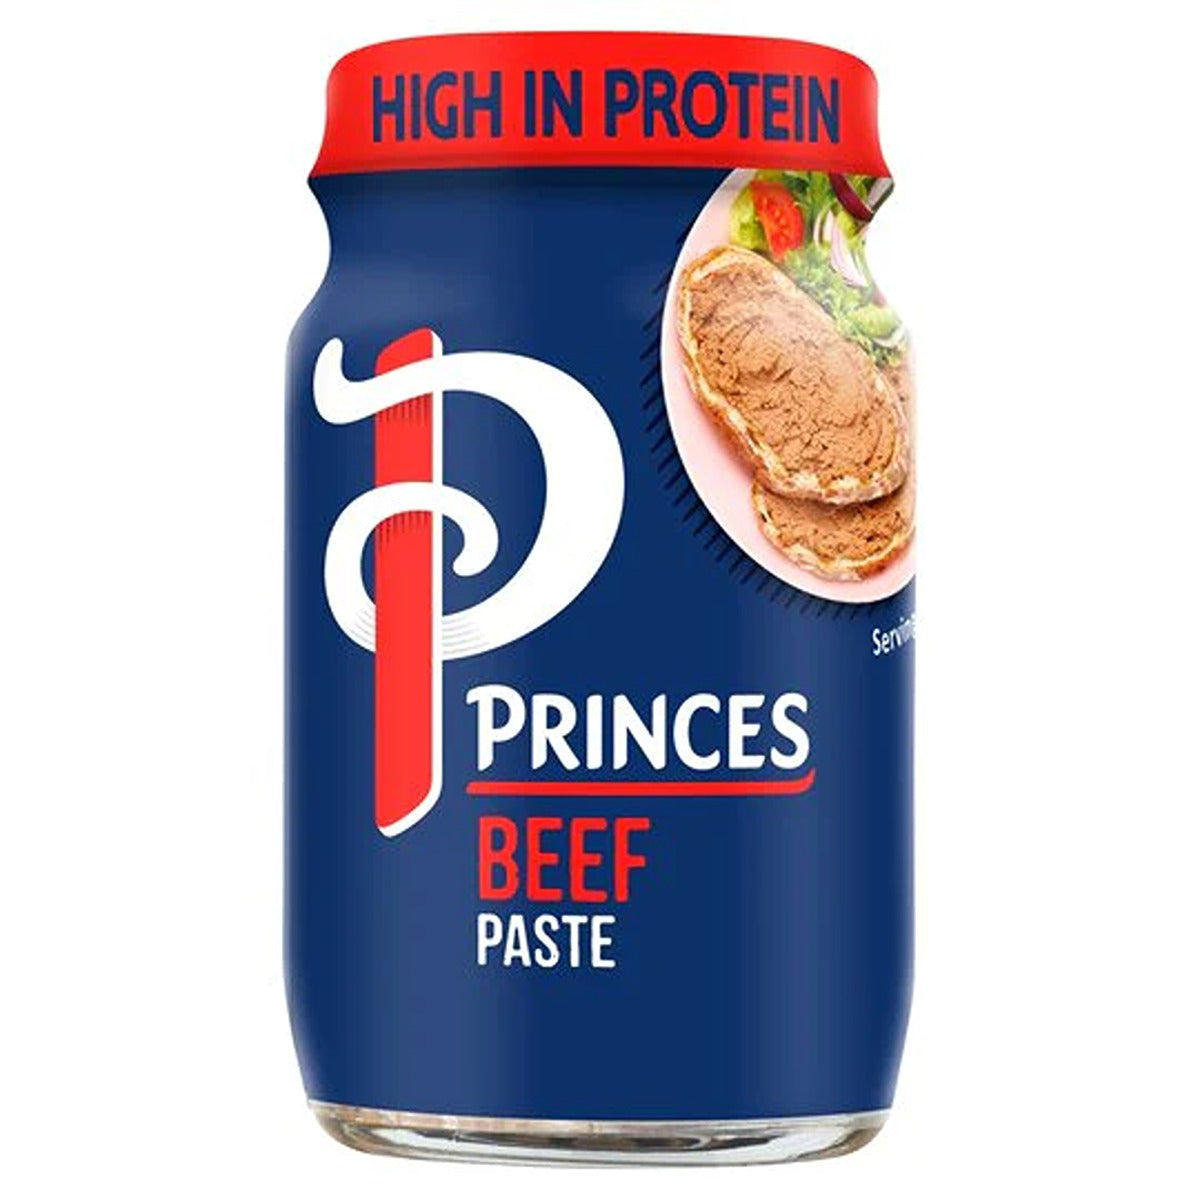 A jar of Princes - Beef Paste - 75g on a white background.